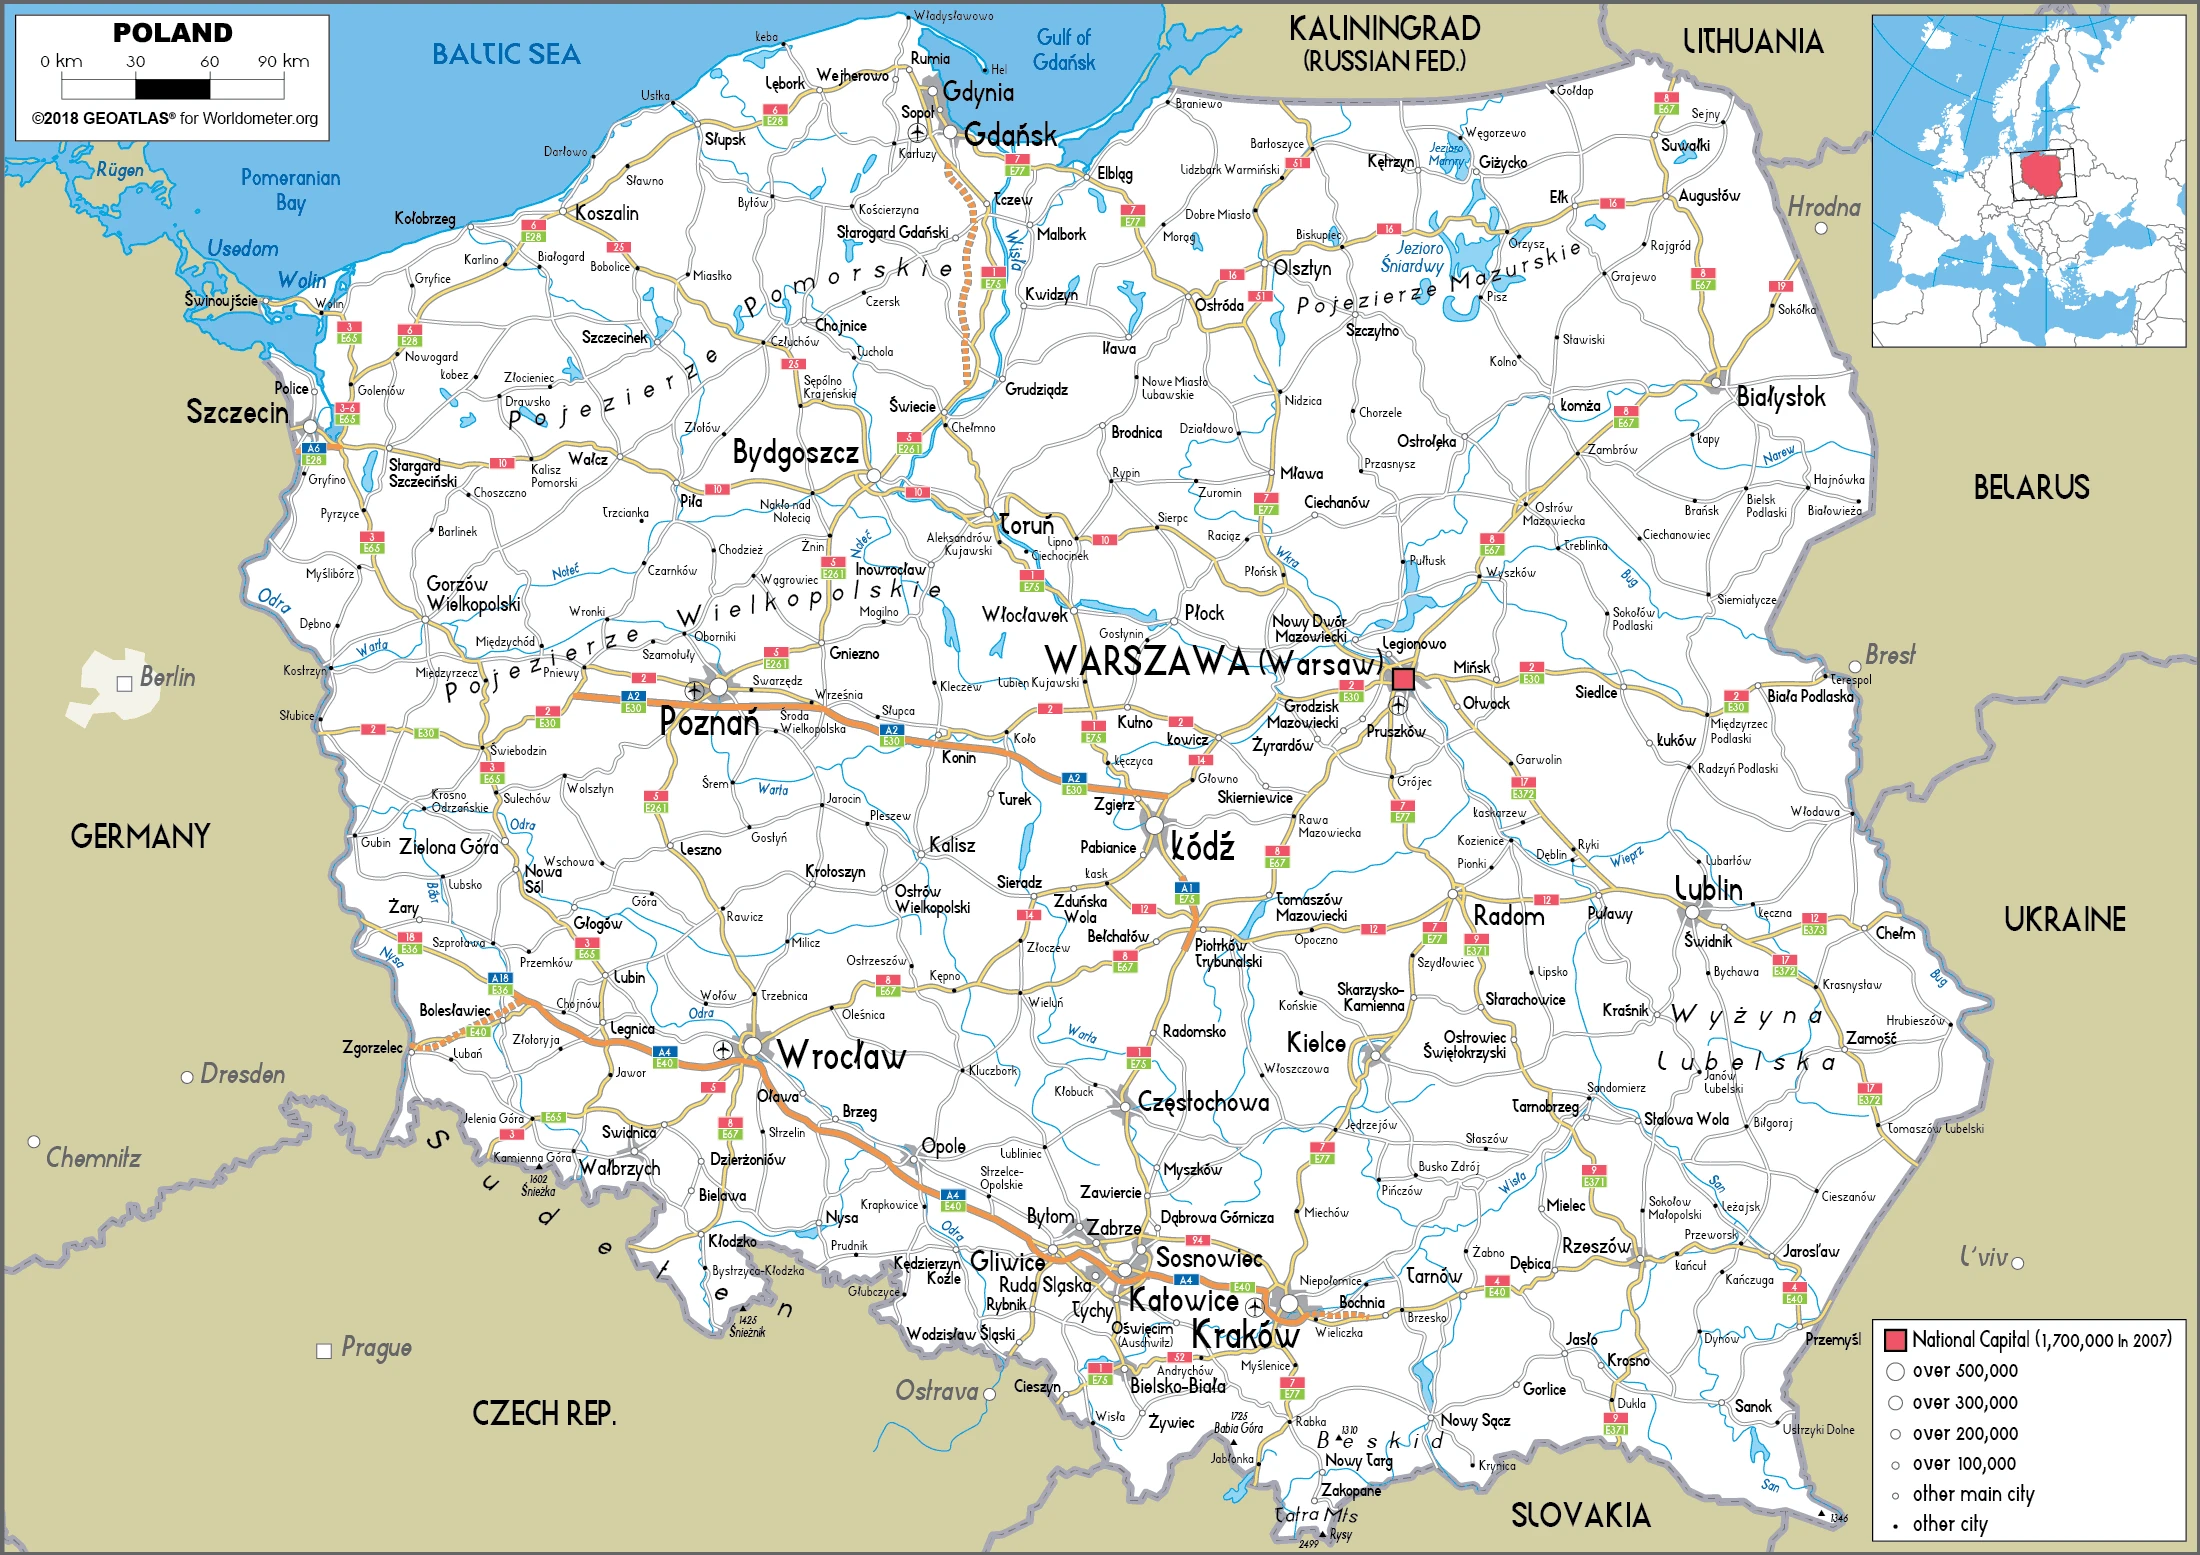 The route plan of the Polish roadways.